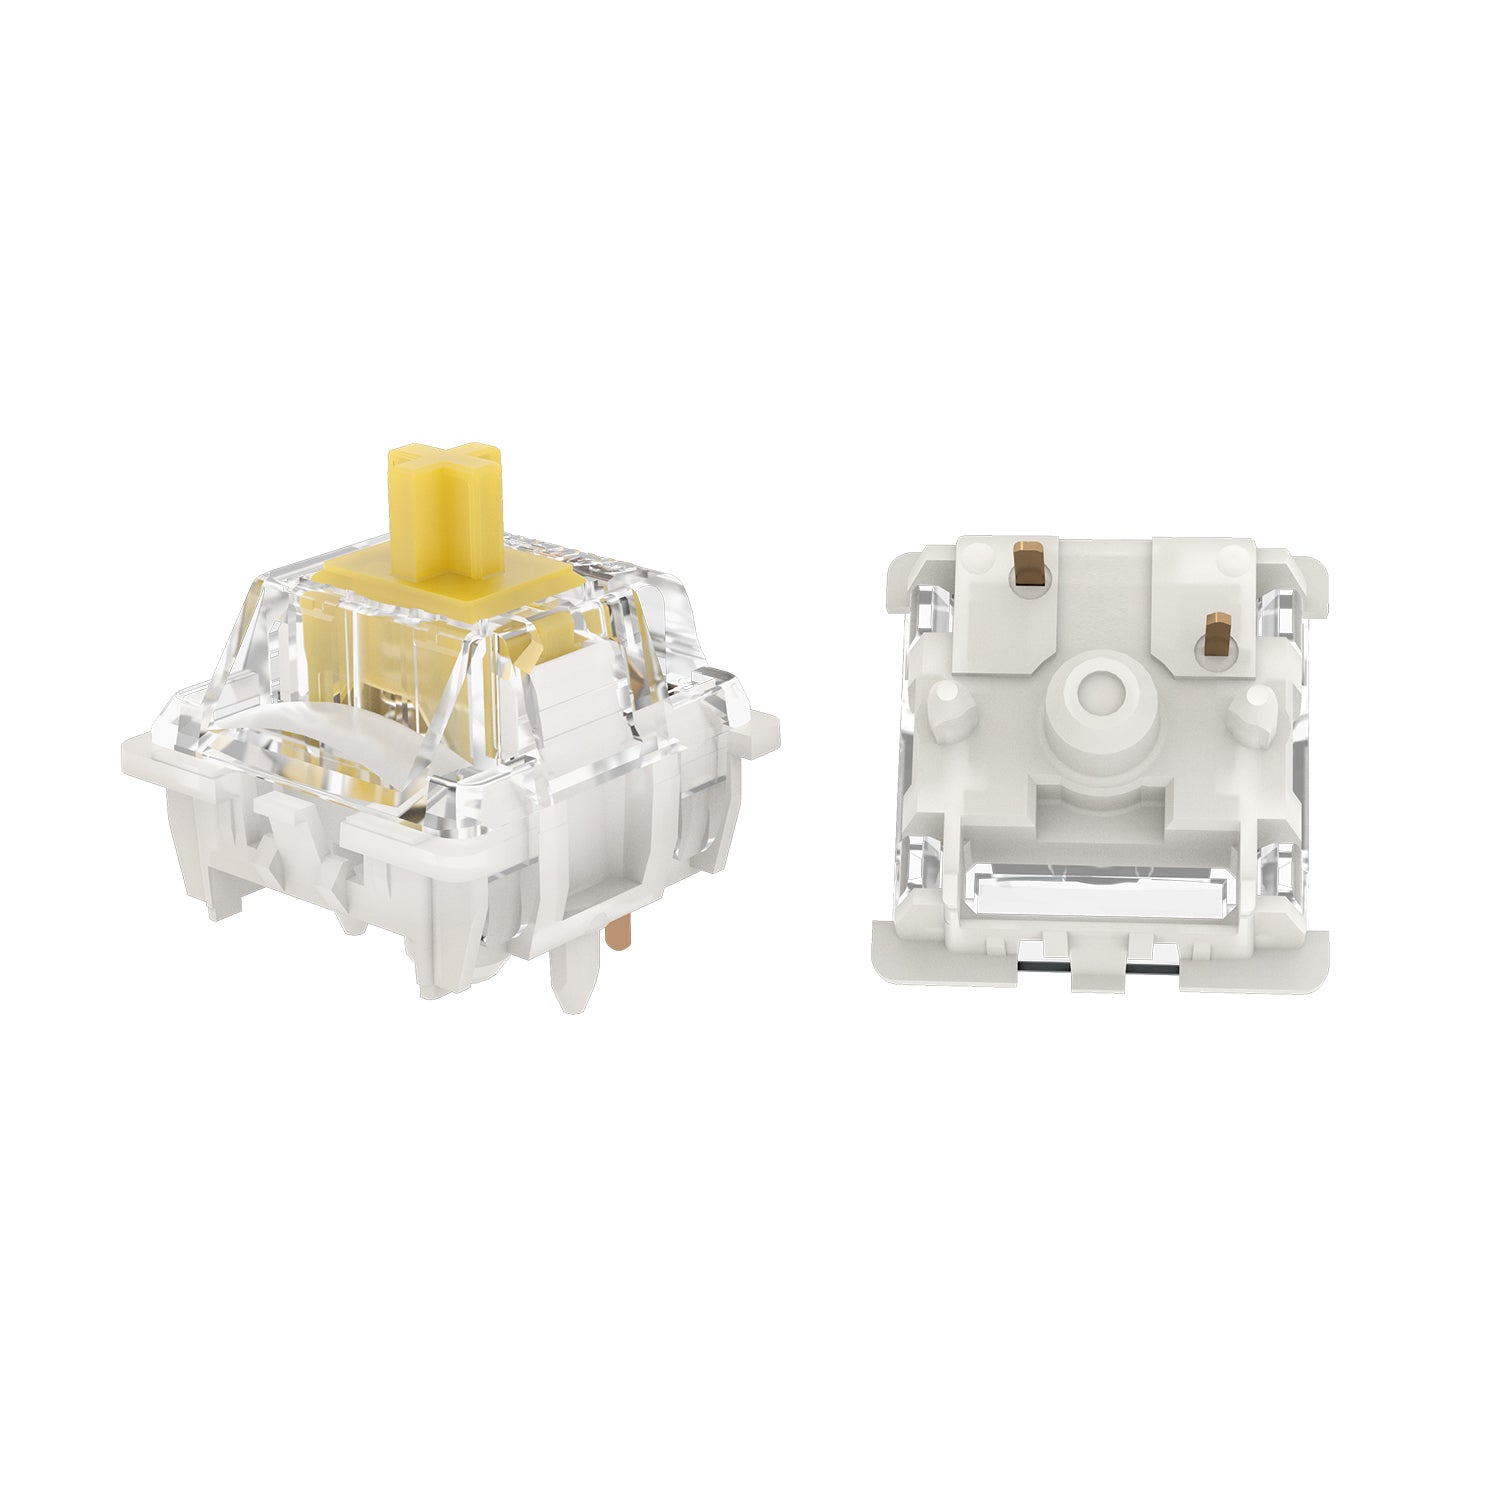 Glacier Gateron G Pro 3.0 Switches Set with Key Switches/Caps Puller Included-Yellow-5-Pin